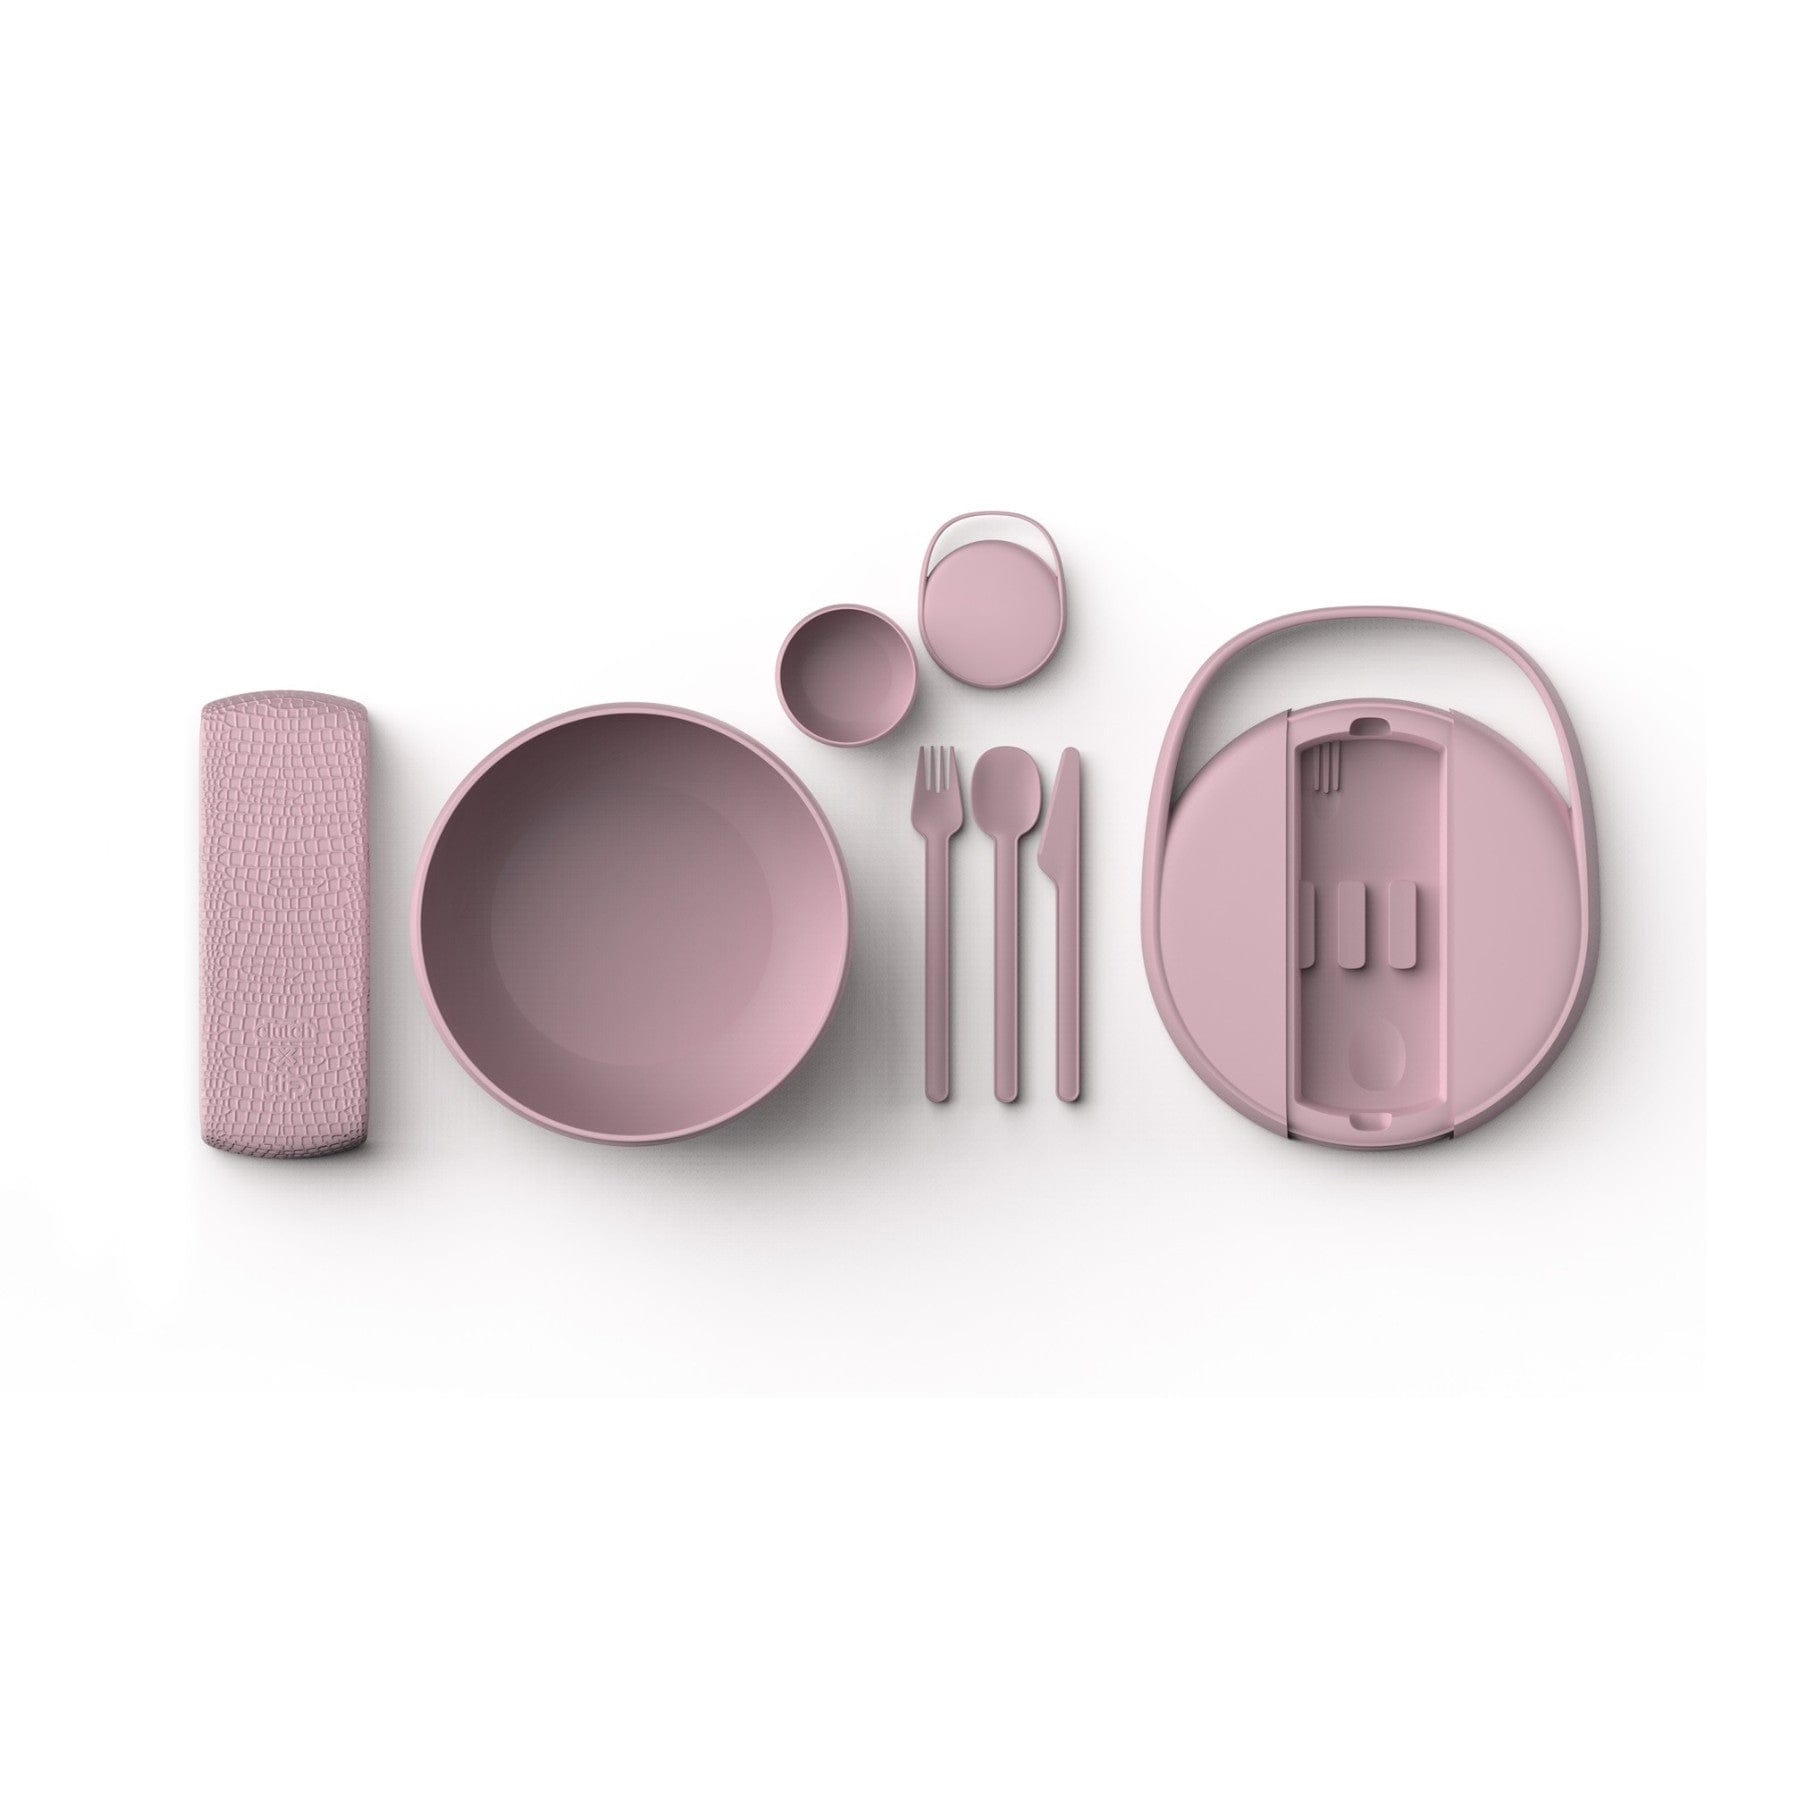 Modern pink dinnerware set with plates, bowl, cup, napkin, and cutlery including a fork, knife, and spoon on a white background.